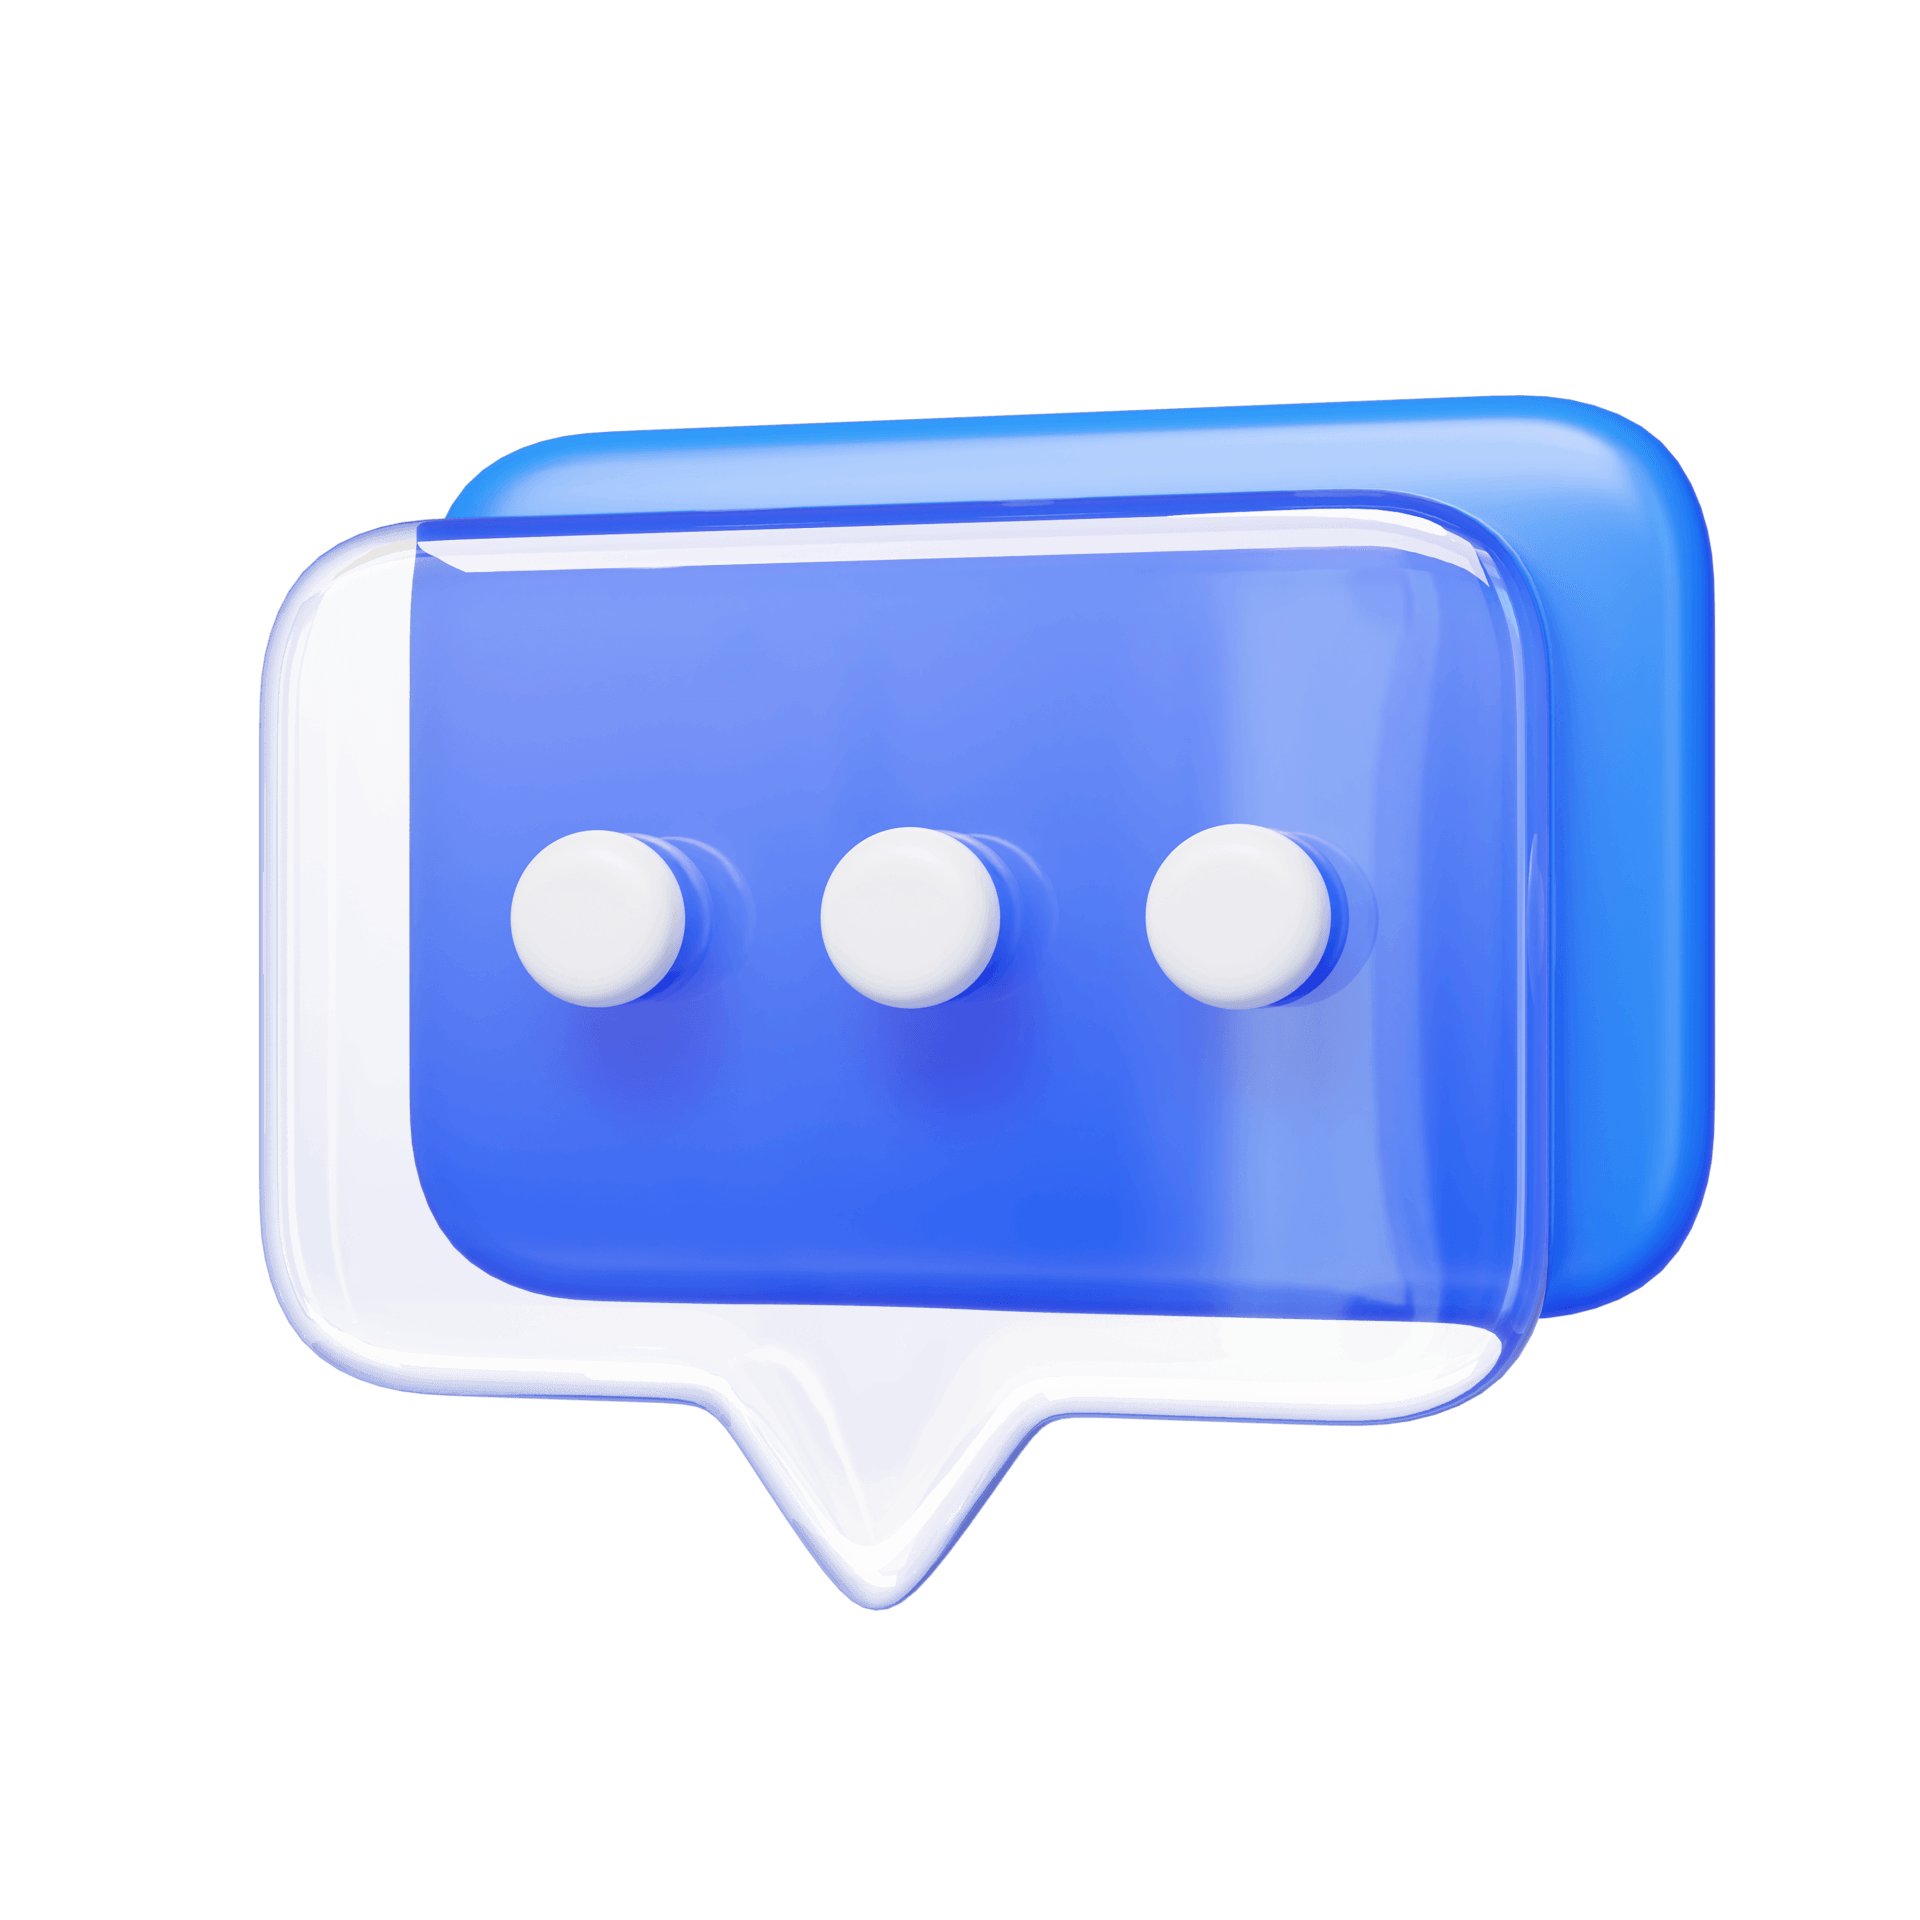 A blue speech bubble with three white dots on it.